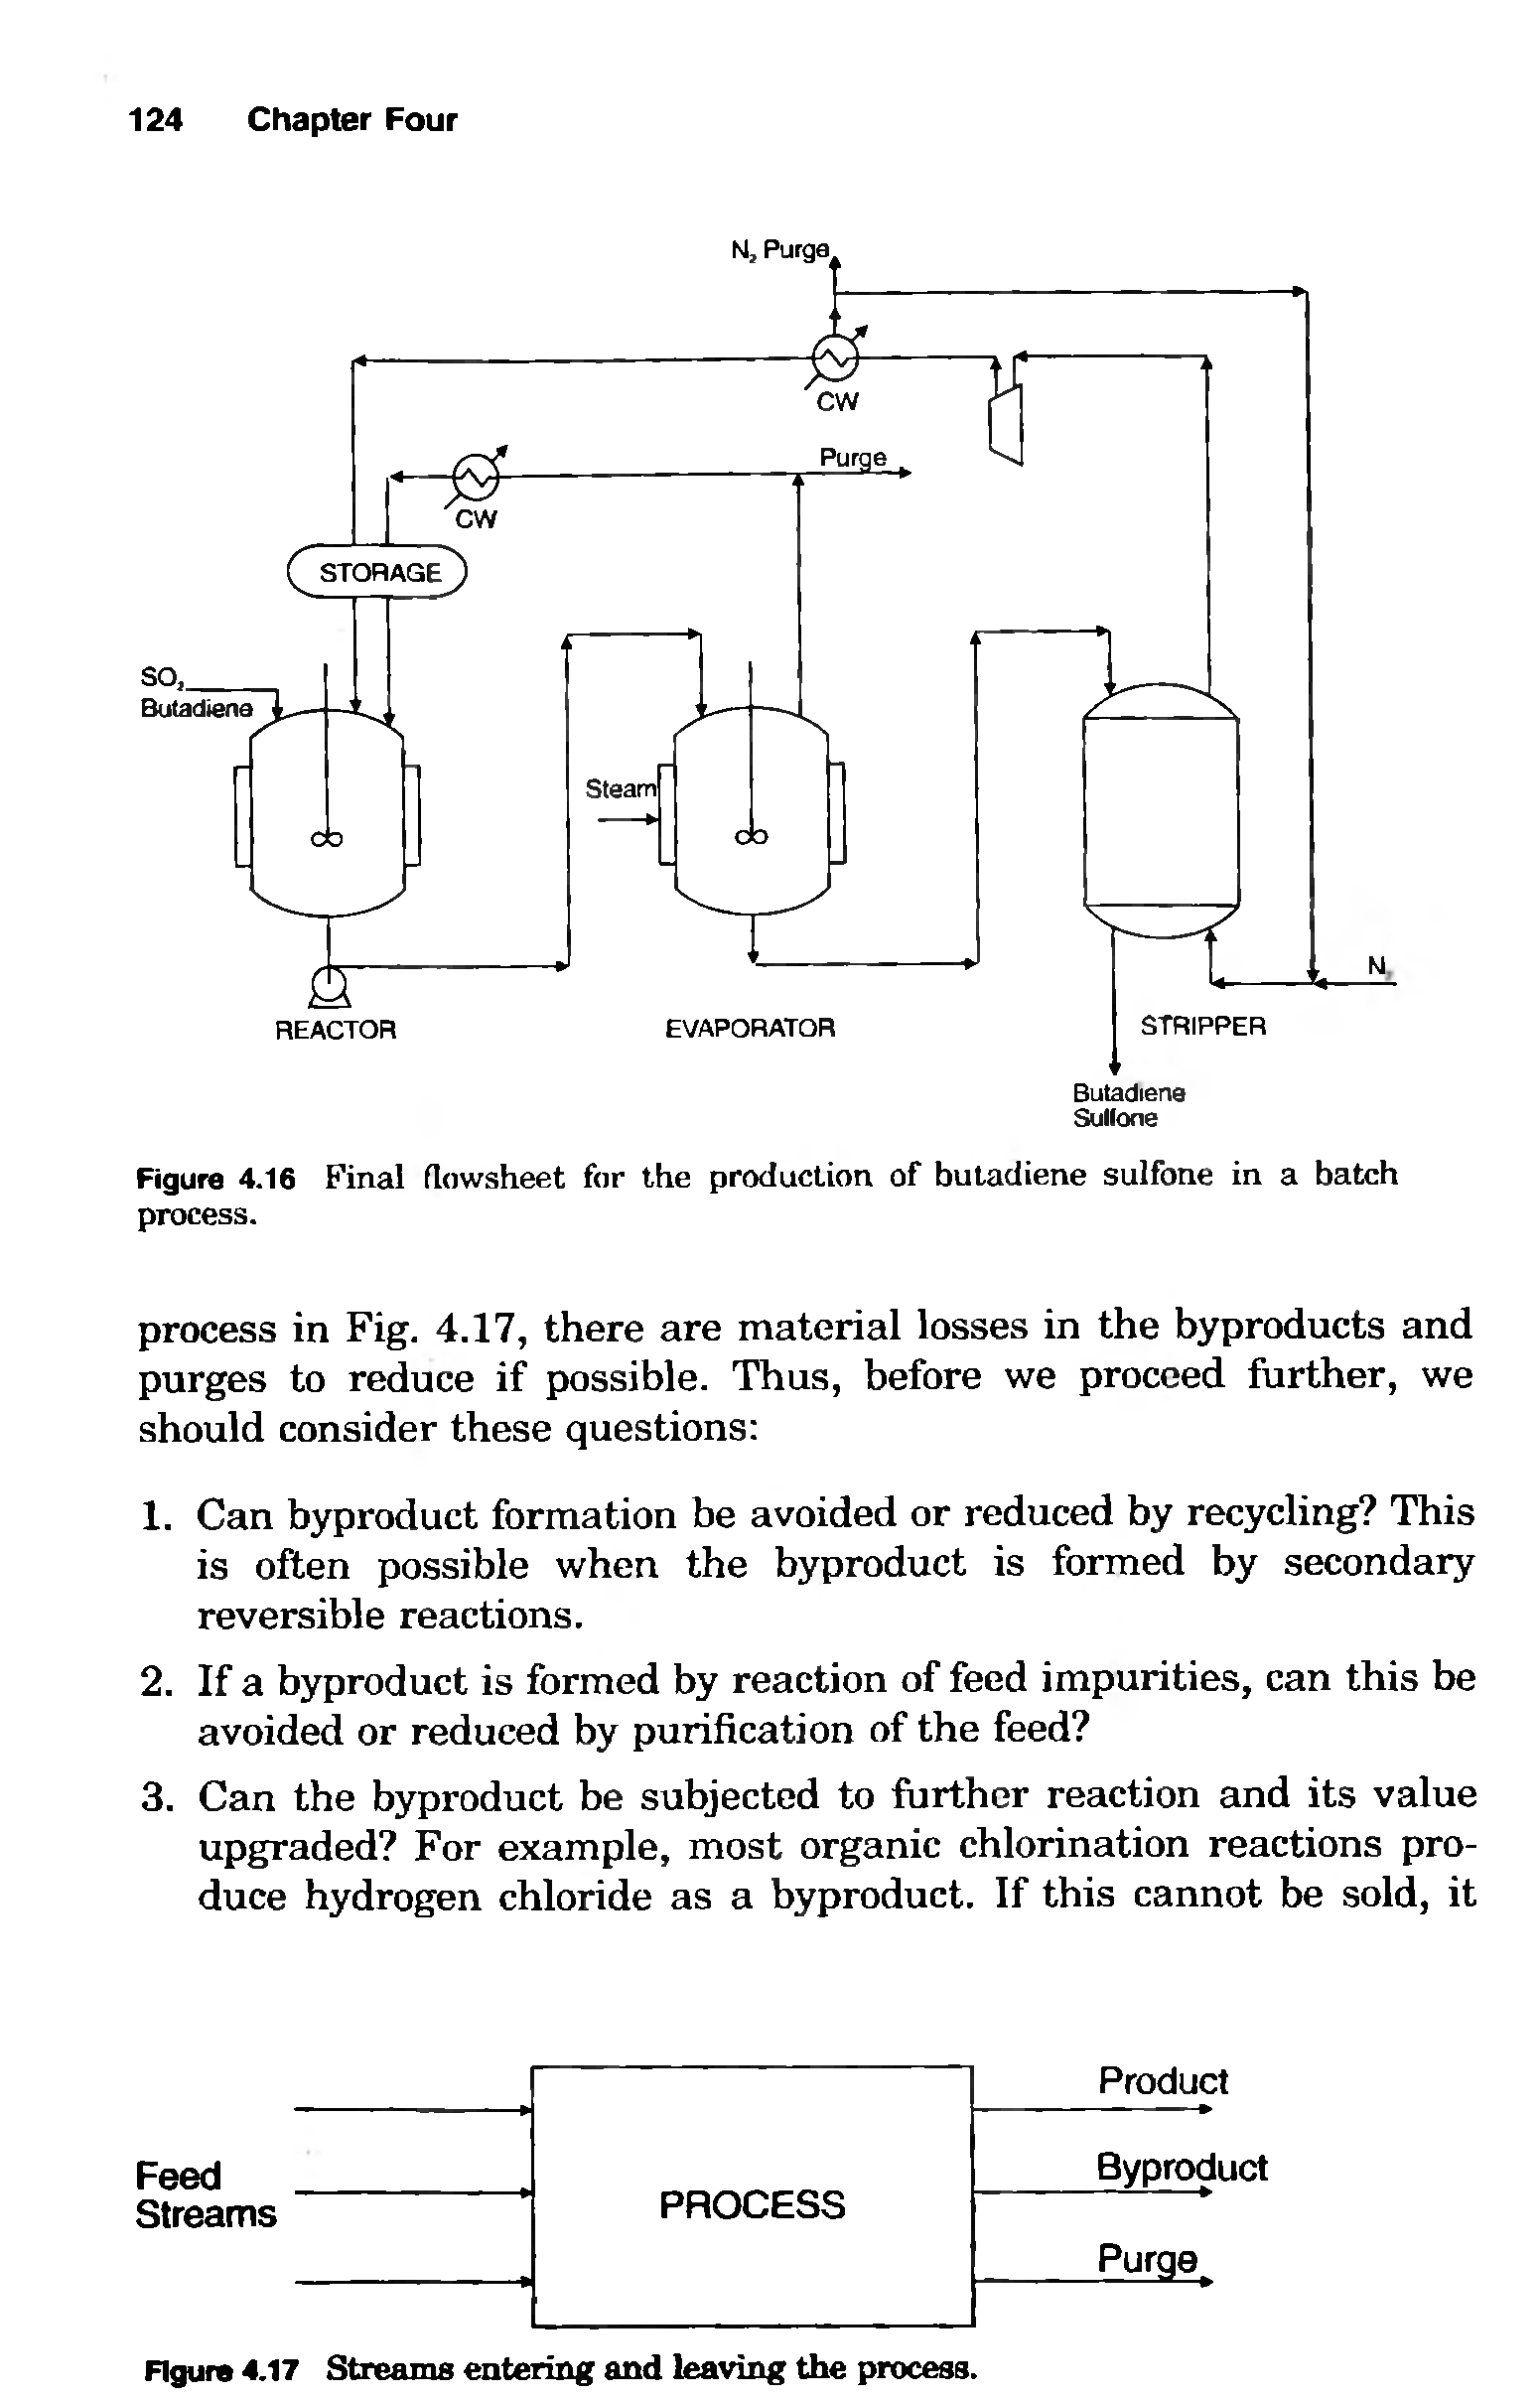 Figure 4.16 Final flowsheet for the production of butadiene sulfone in a batch process.